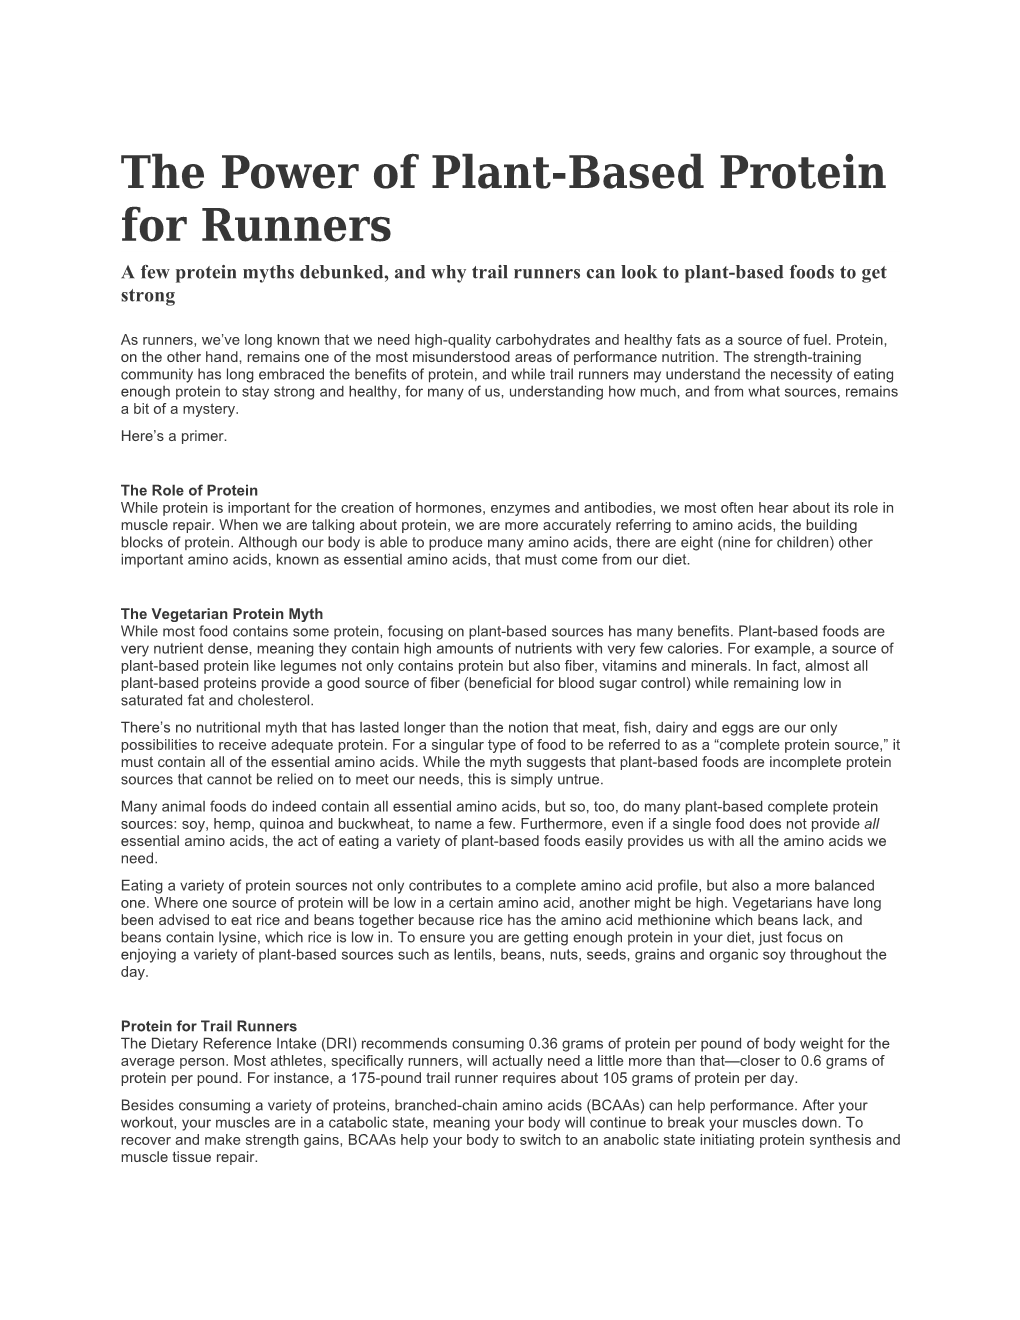 The Power of Plant-Based Protein for Runners